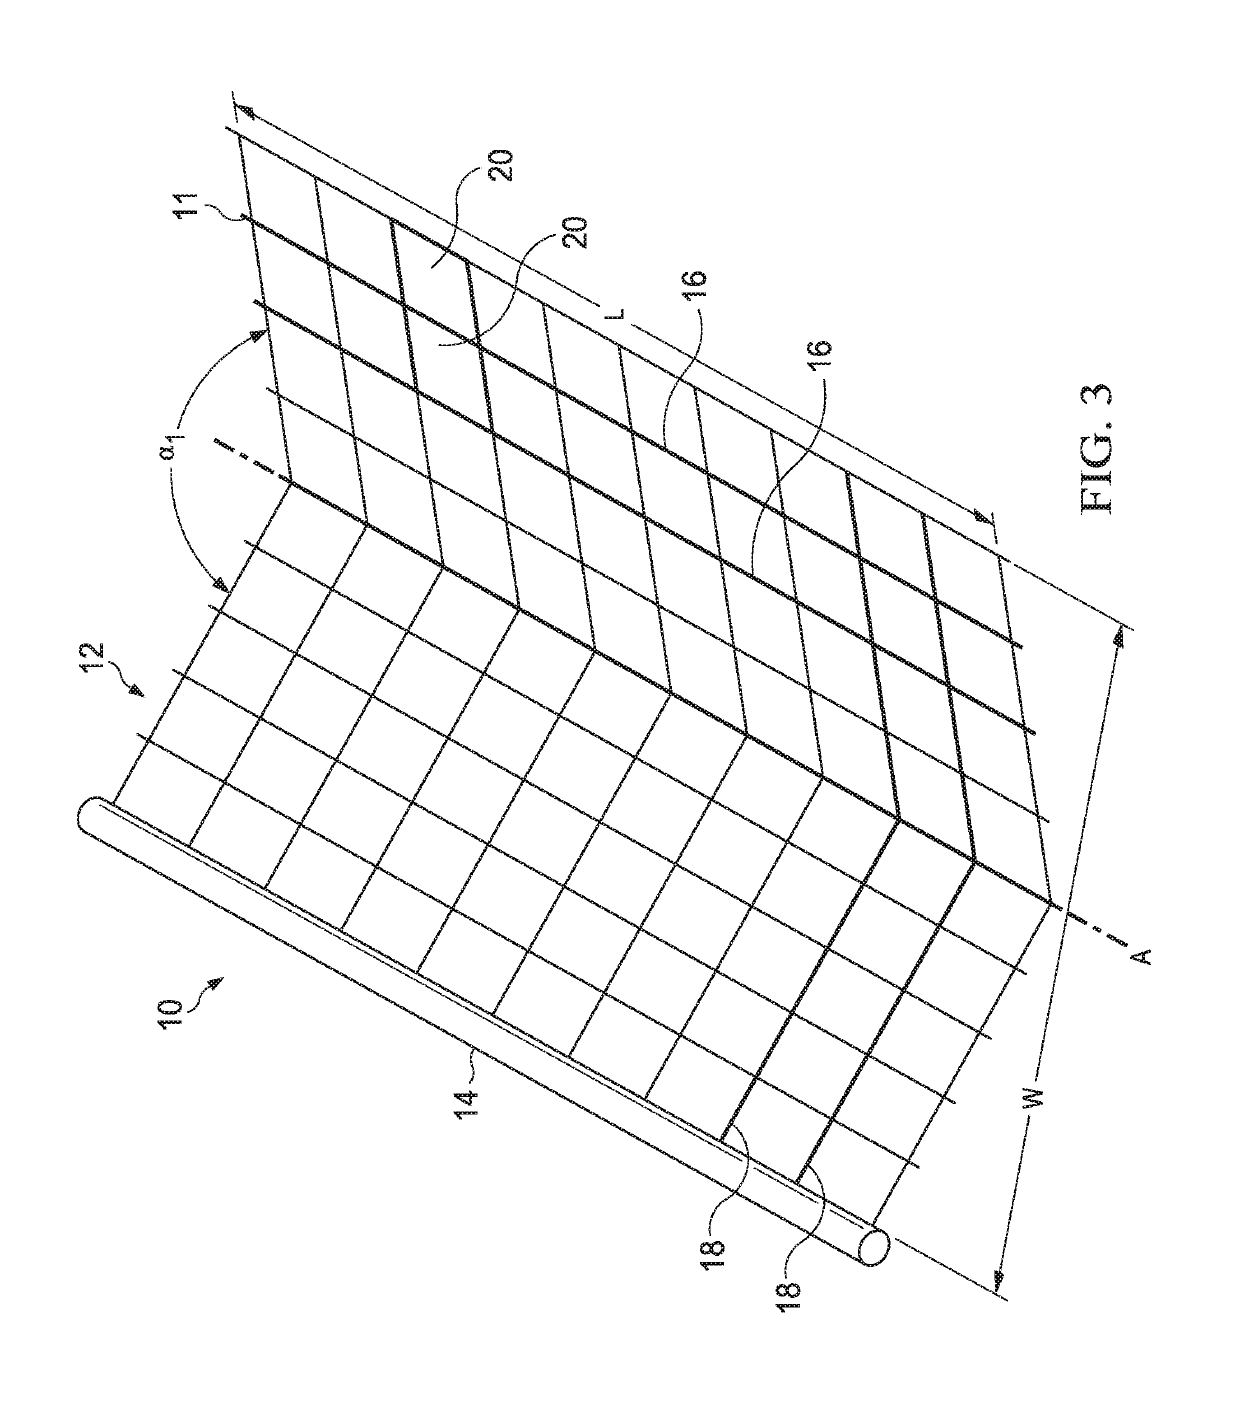 Self-aligning corner bead for fireproofing structural steel member and method of using same